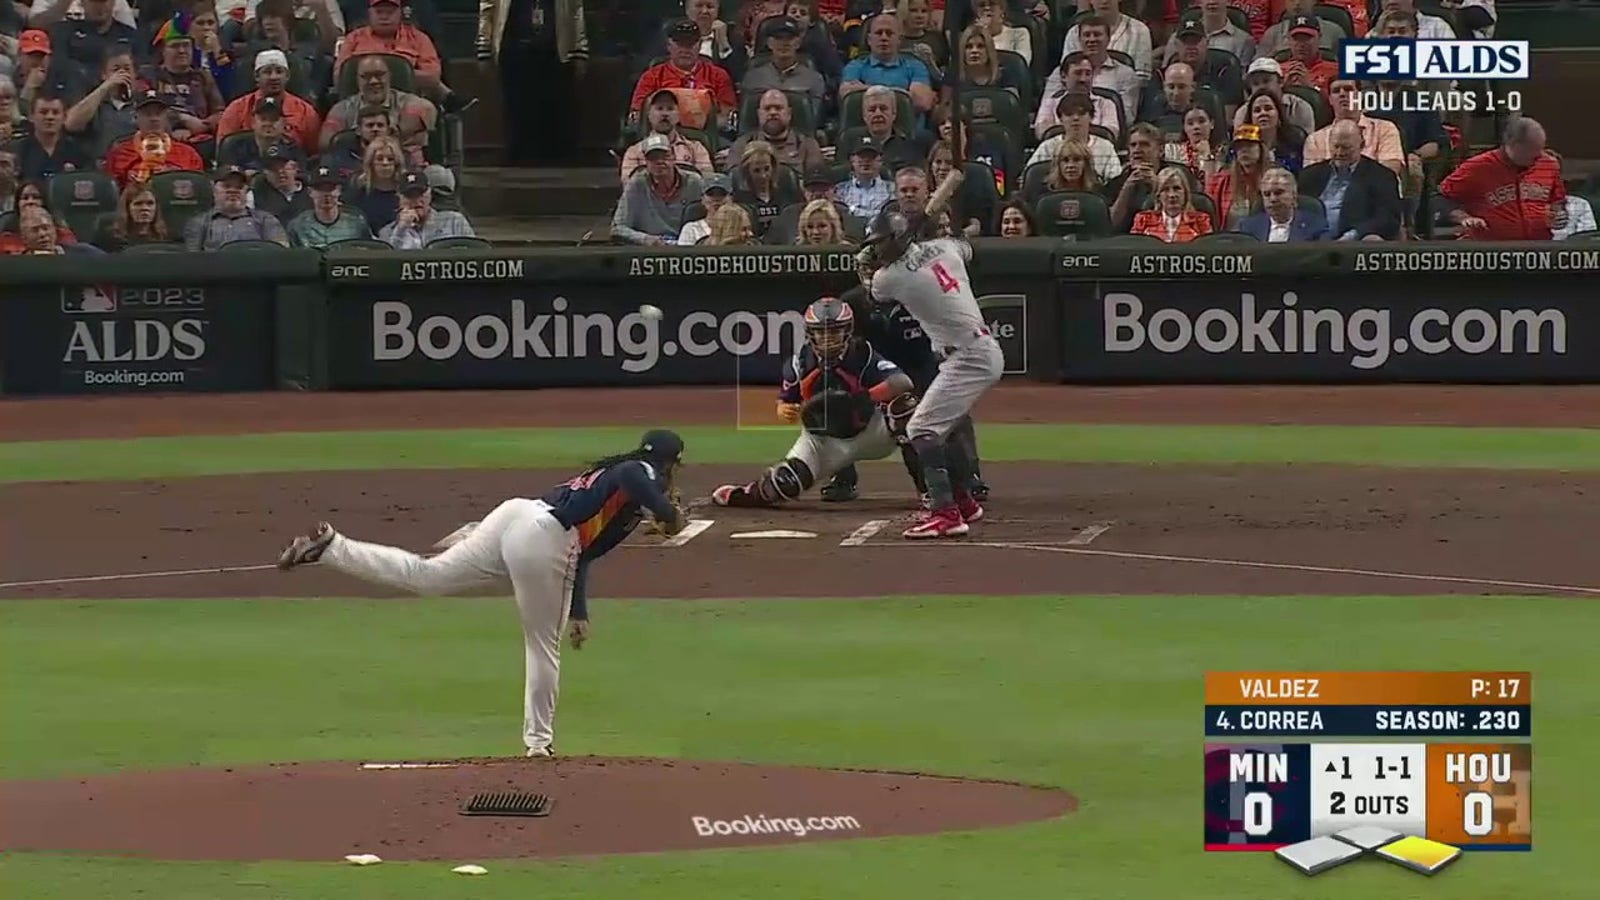 Twins' Carlos Correa hits an RBI double against his pale team to grab an early lead vs. Astros